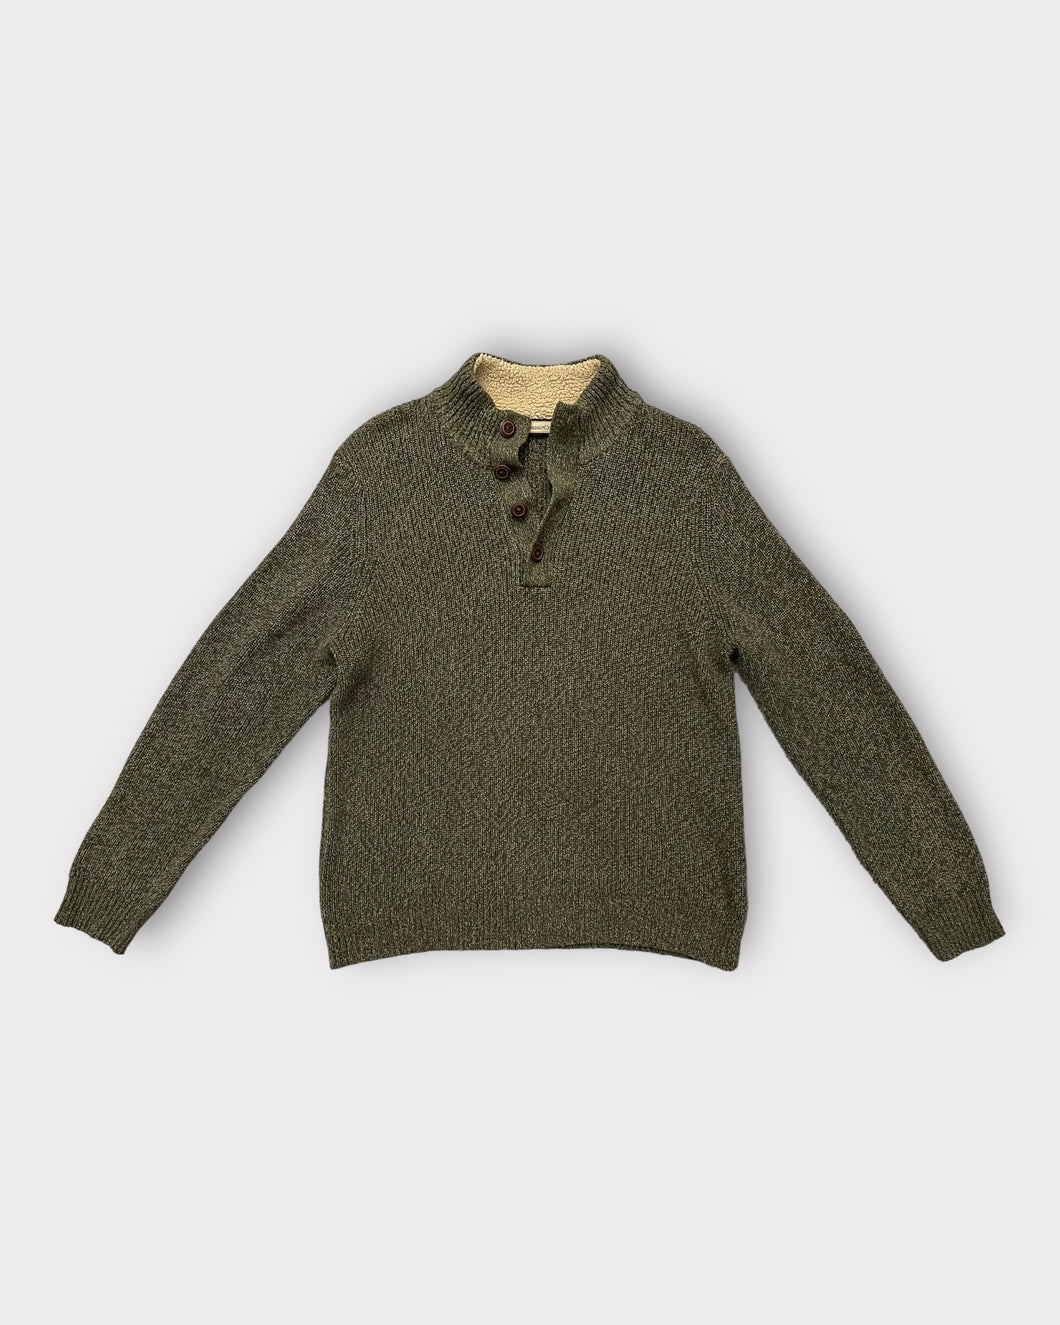 GH Bass & Co Green Knit Pullover with Sherpa Lined Collar (L)